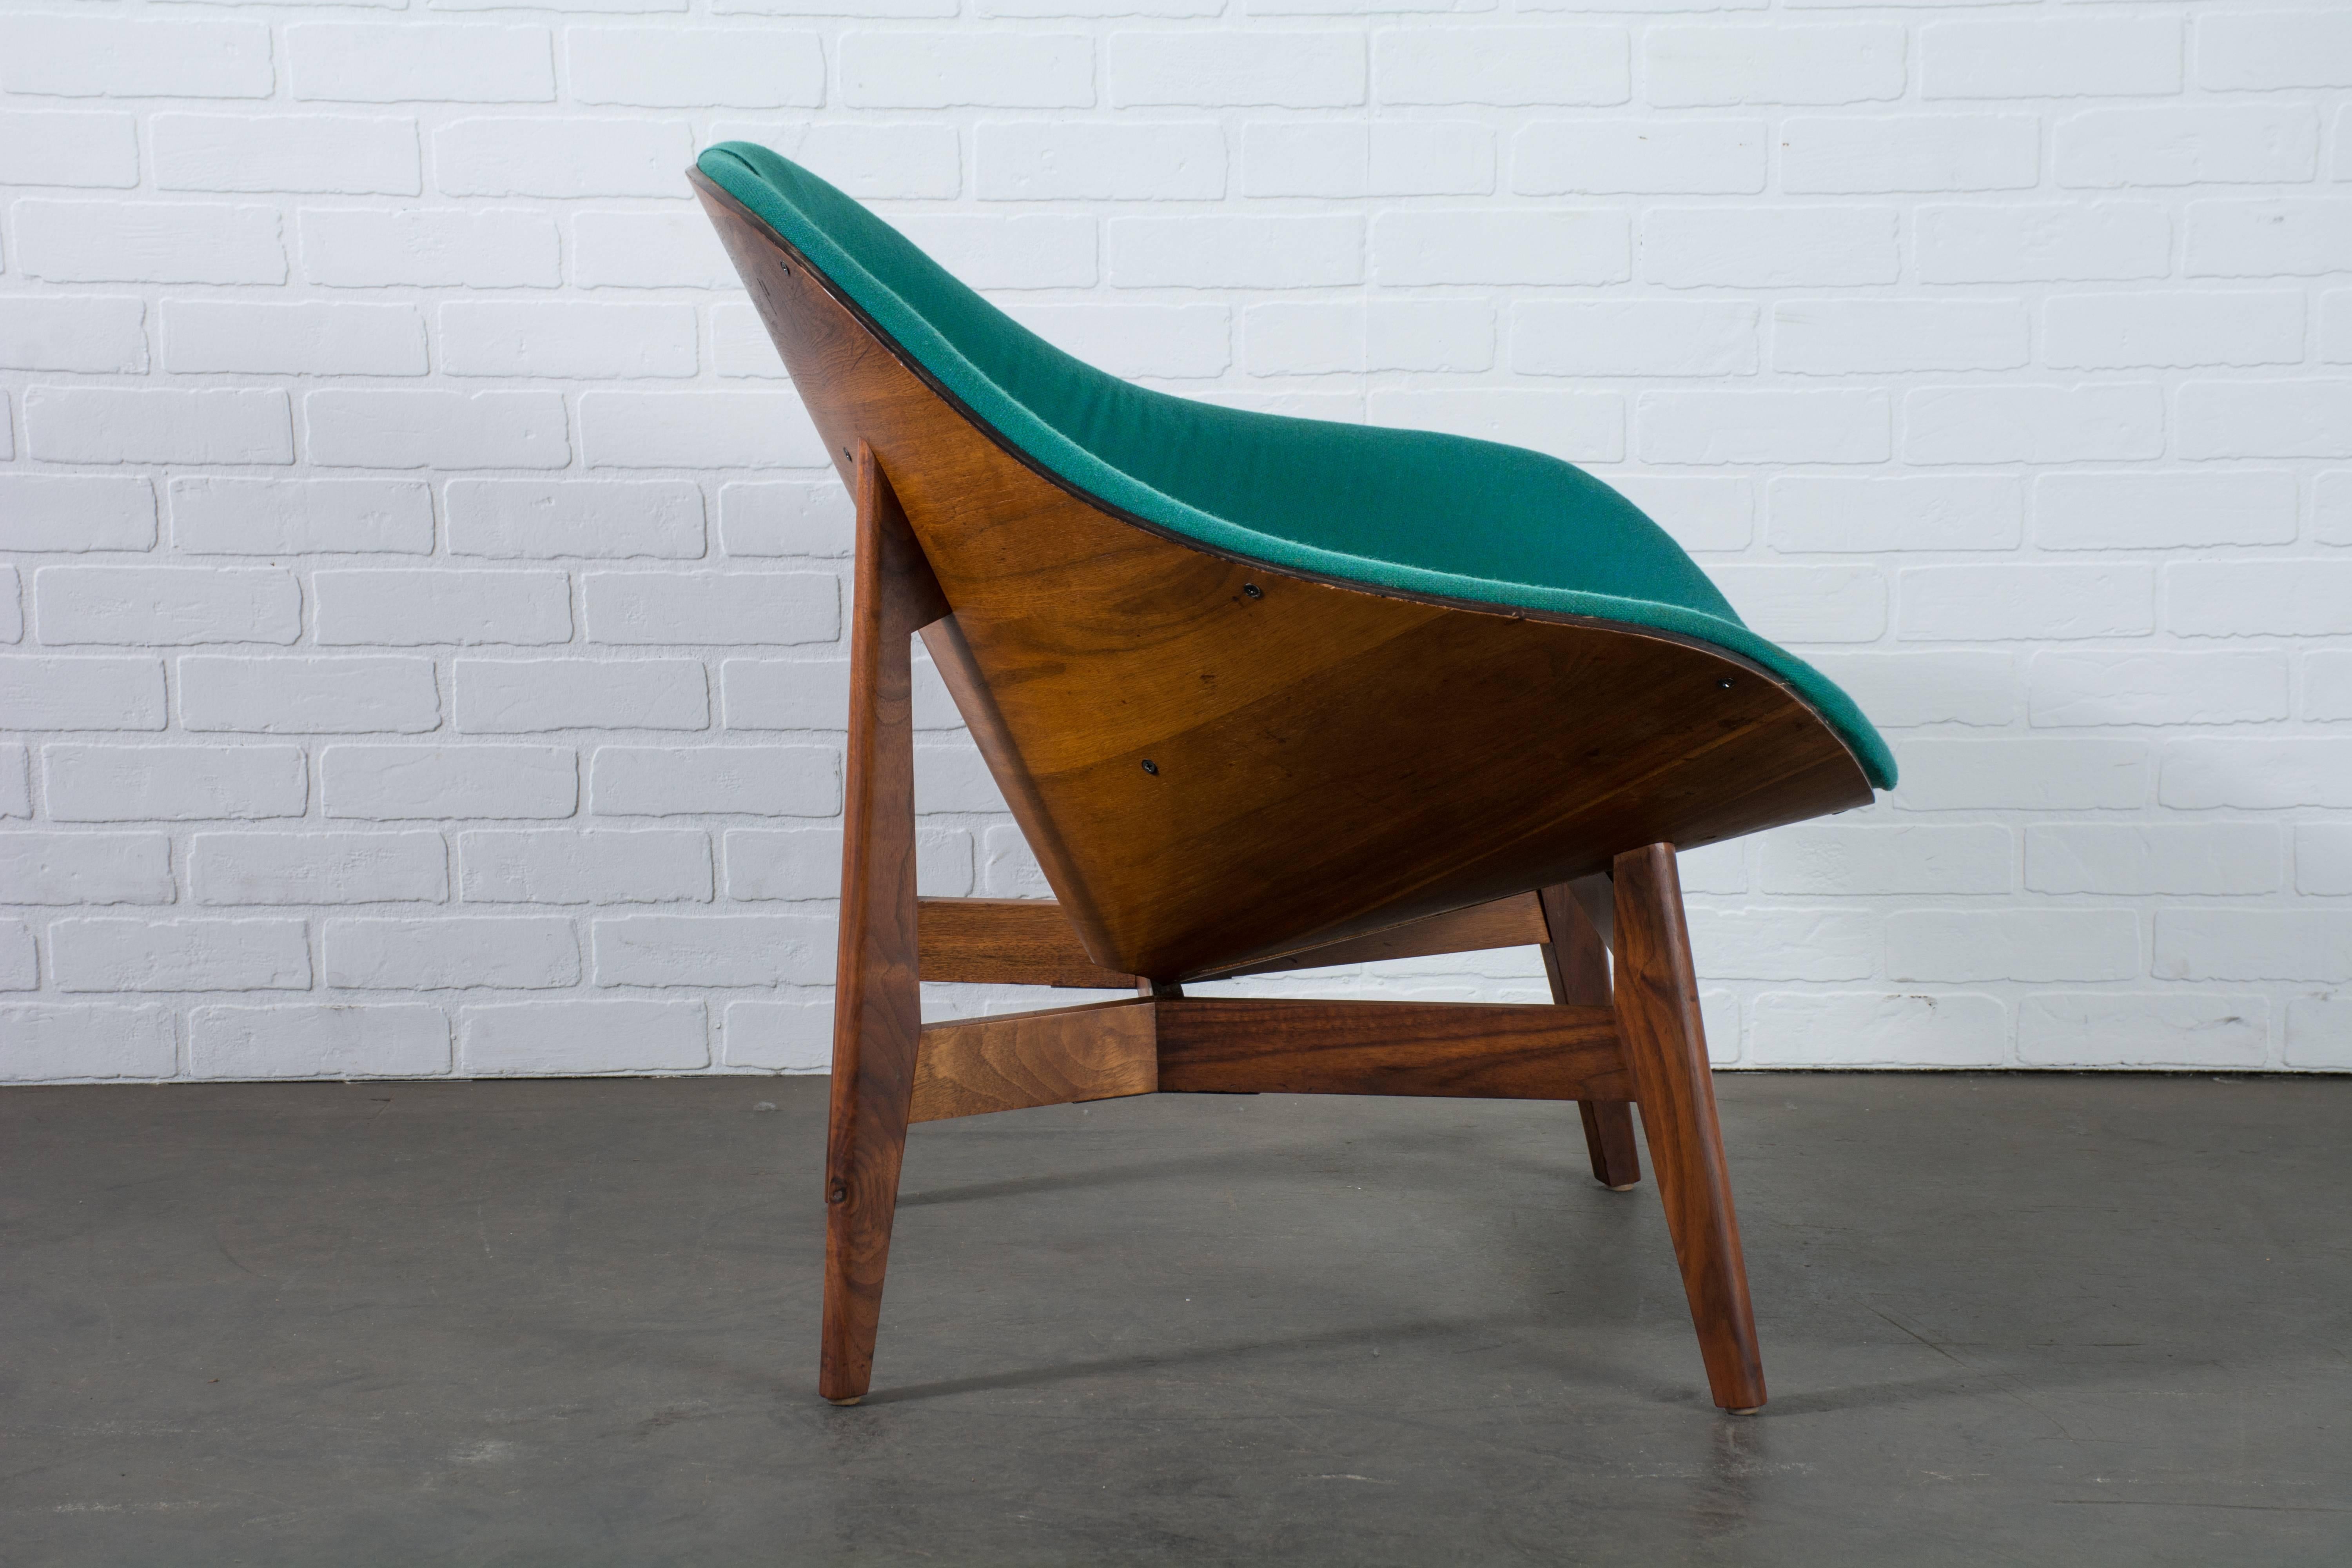 This unique vintage midcentury lounge chair was designed by George Mulhauser for Plycraft.  If features a walnut frame that wraps around the chair and the original tufted teal upholstery.